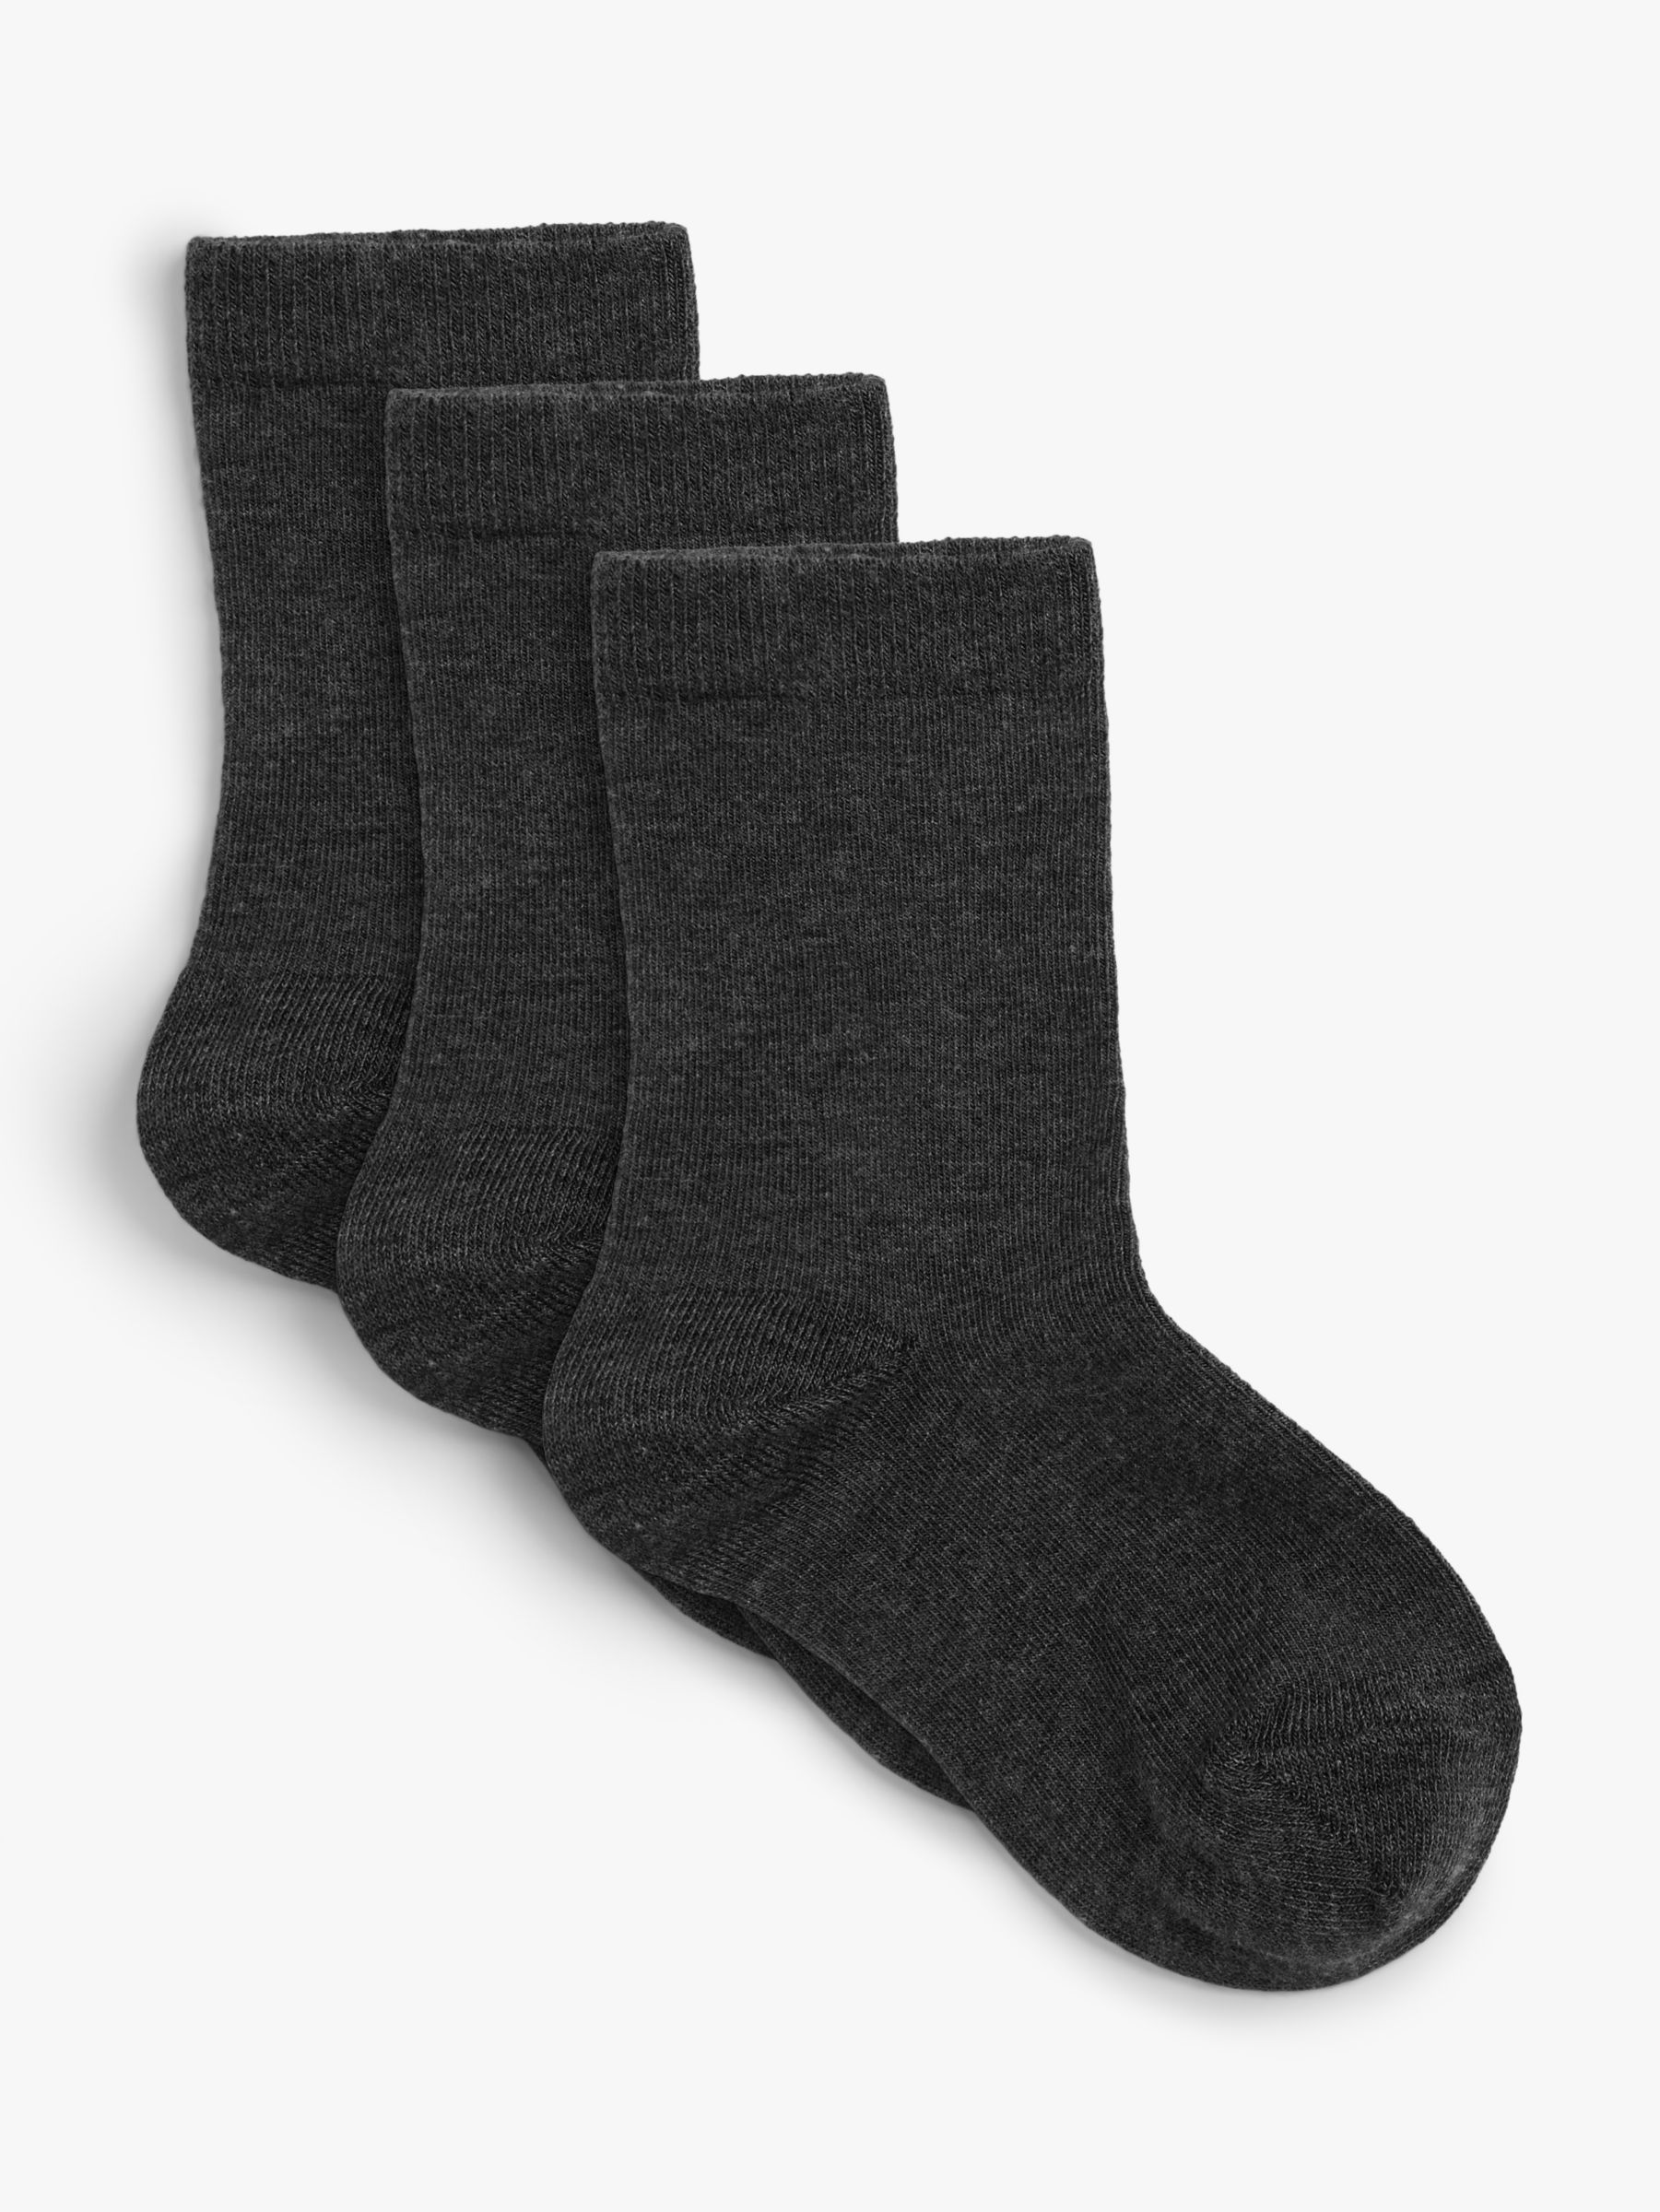 John Lewis Kids' Supersoft Thermal Ankle Socks, Pack of 3, Charcoal at ...